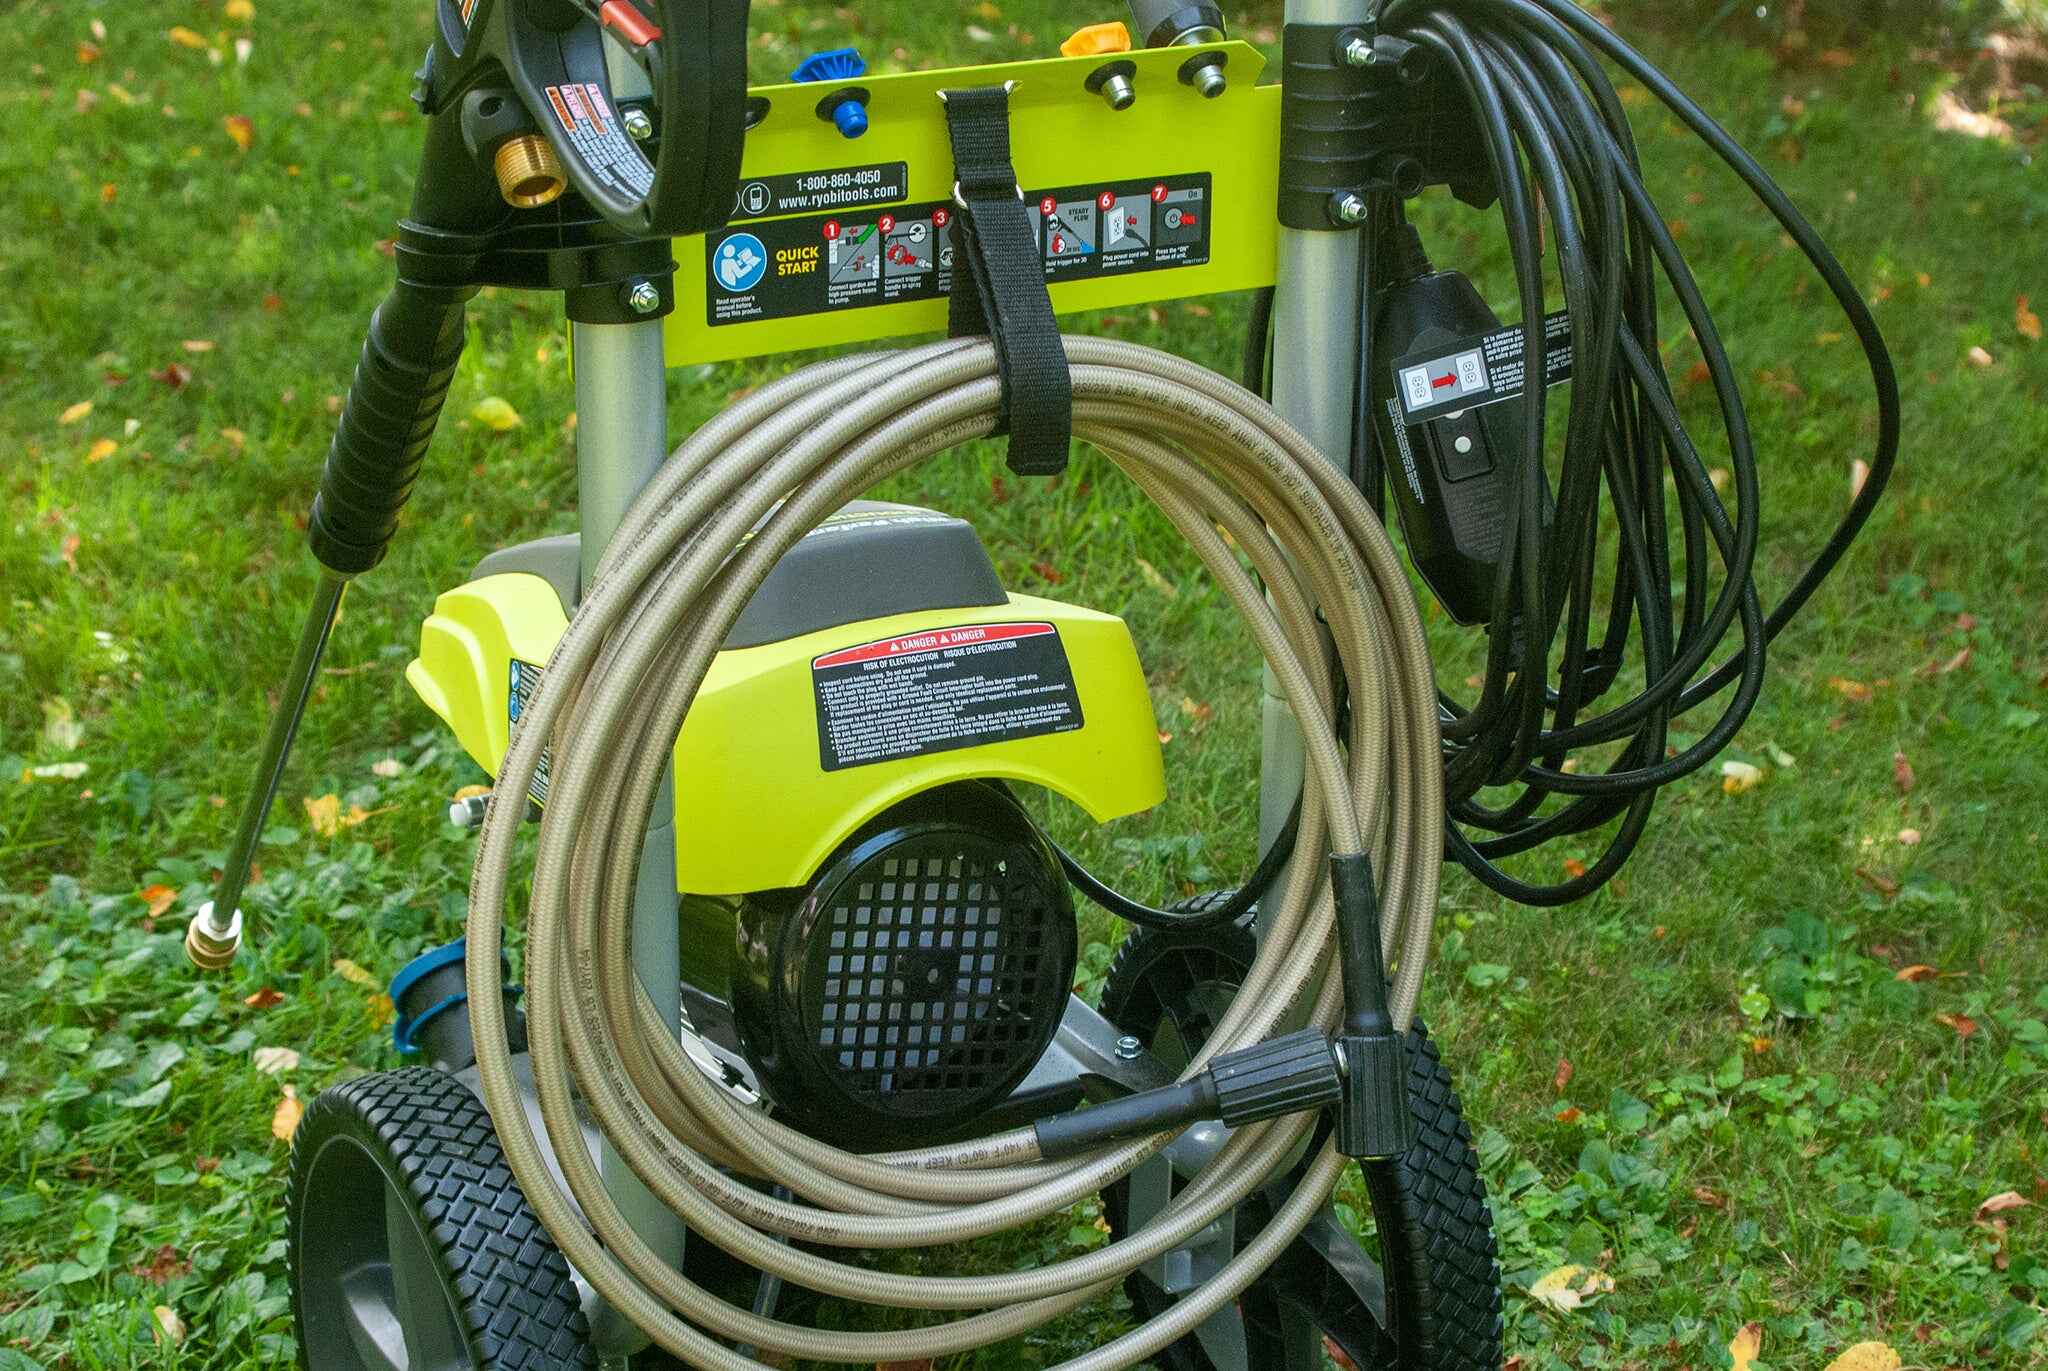 How To Connect Hose To Ryobi Pressure Washer